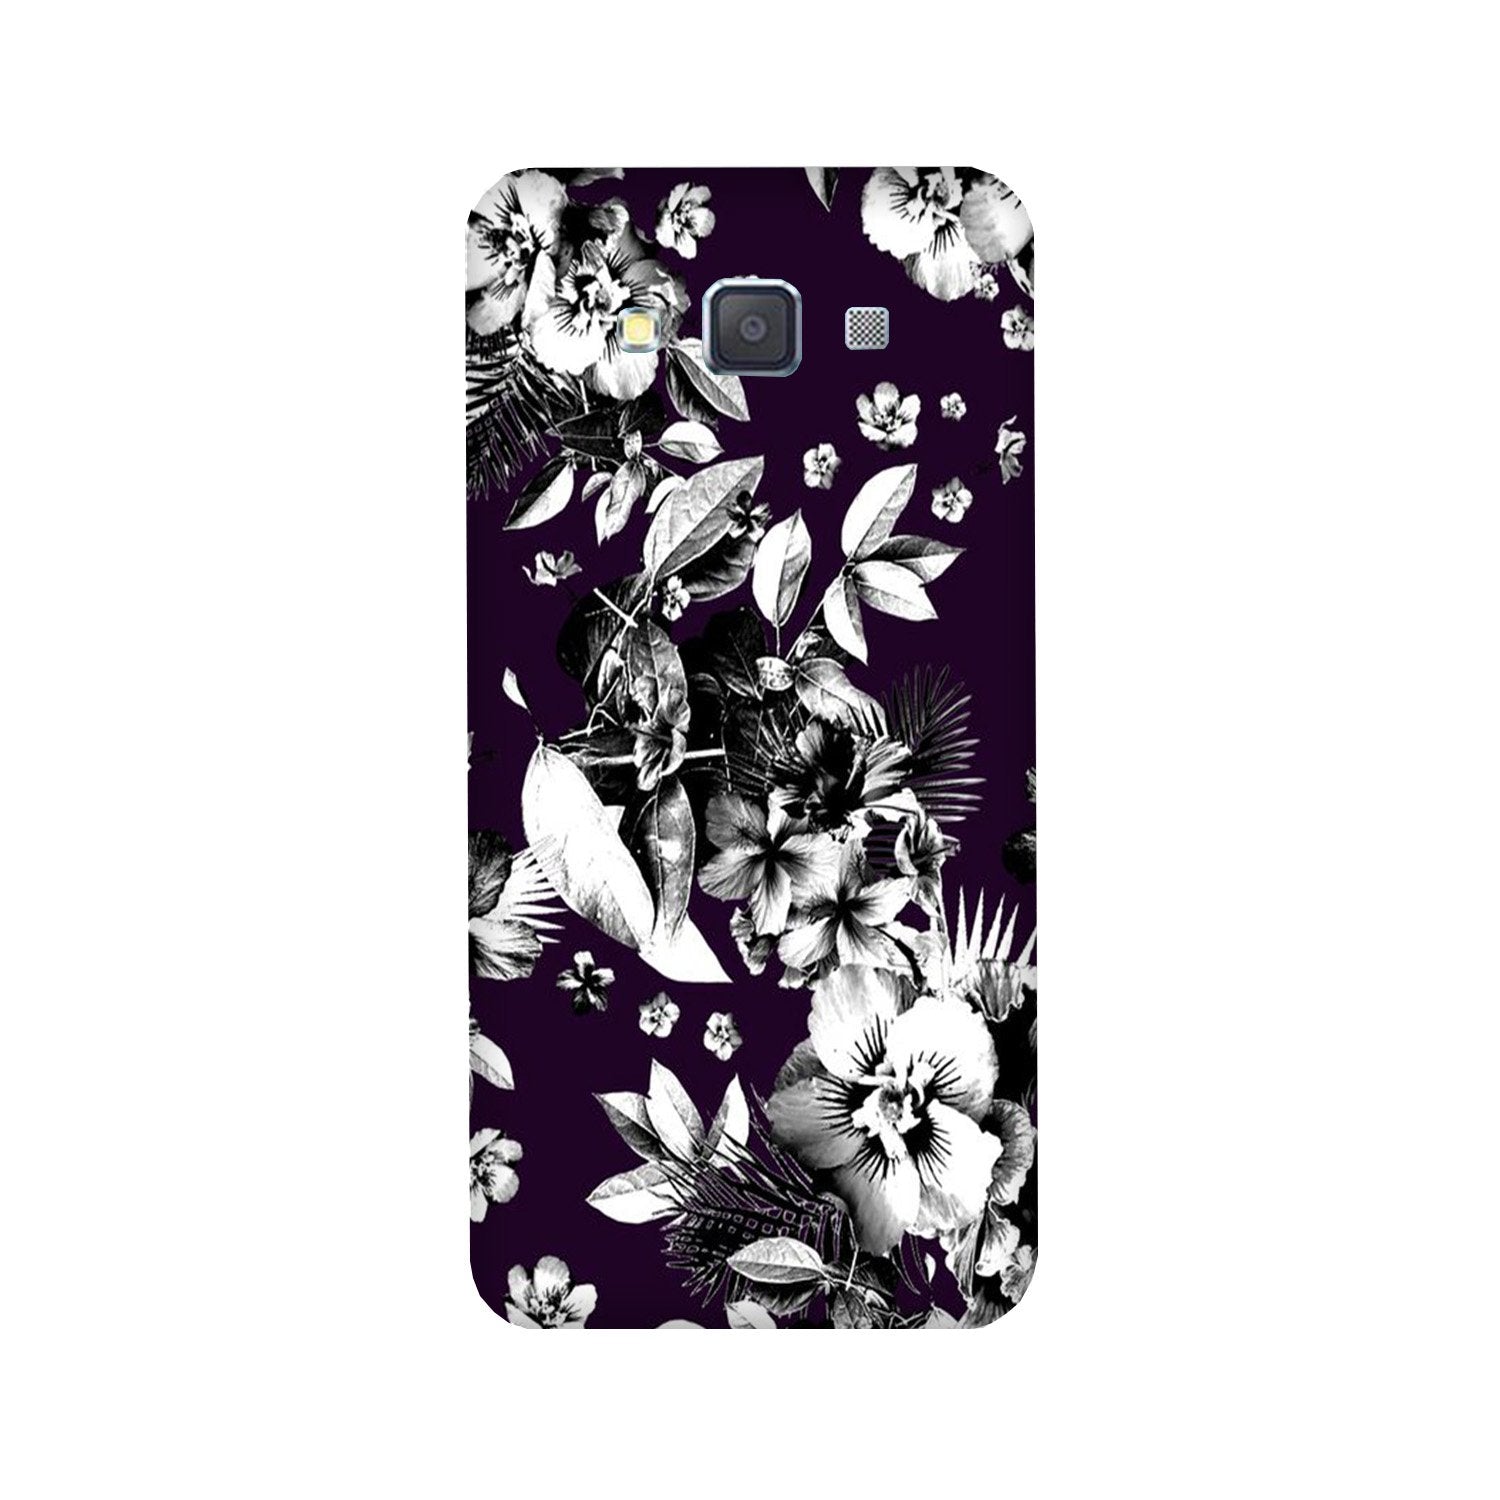 white flowers Case for Galaxy Grand Max